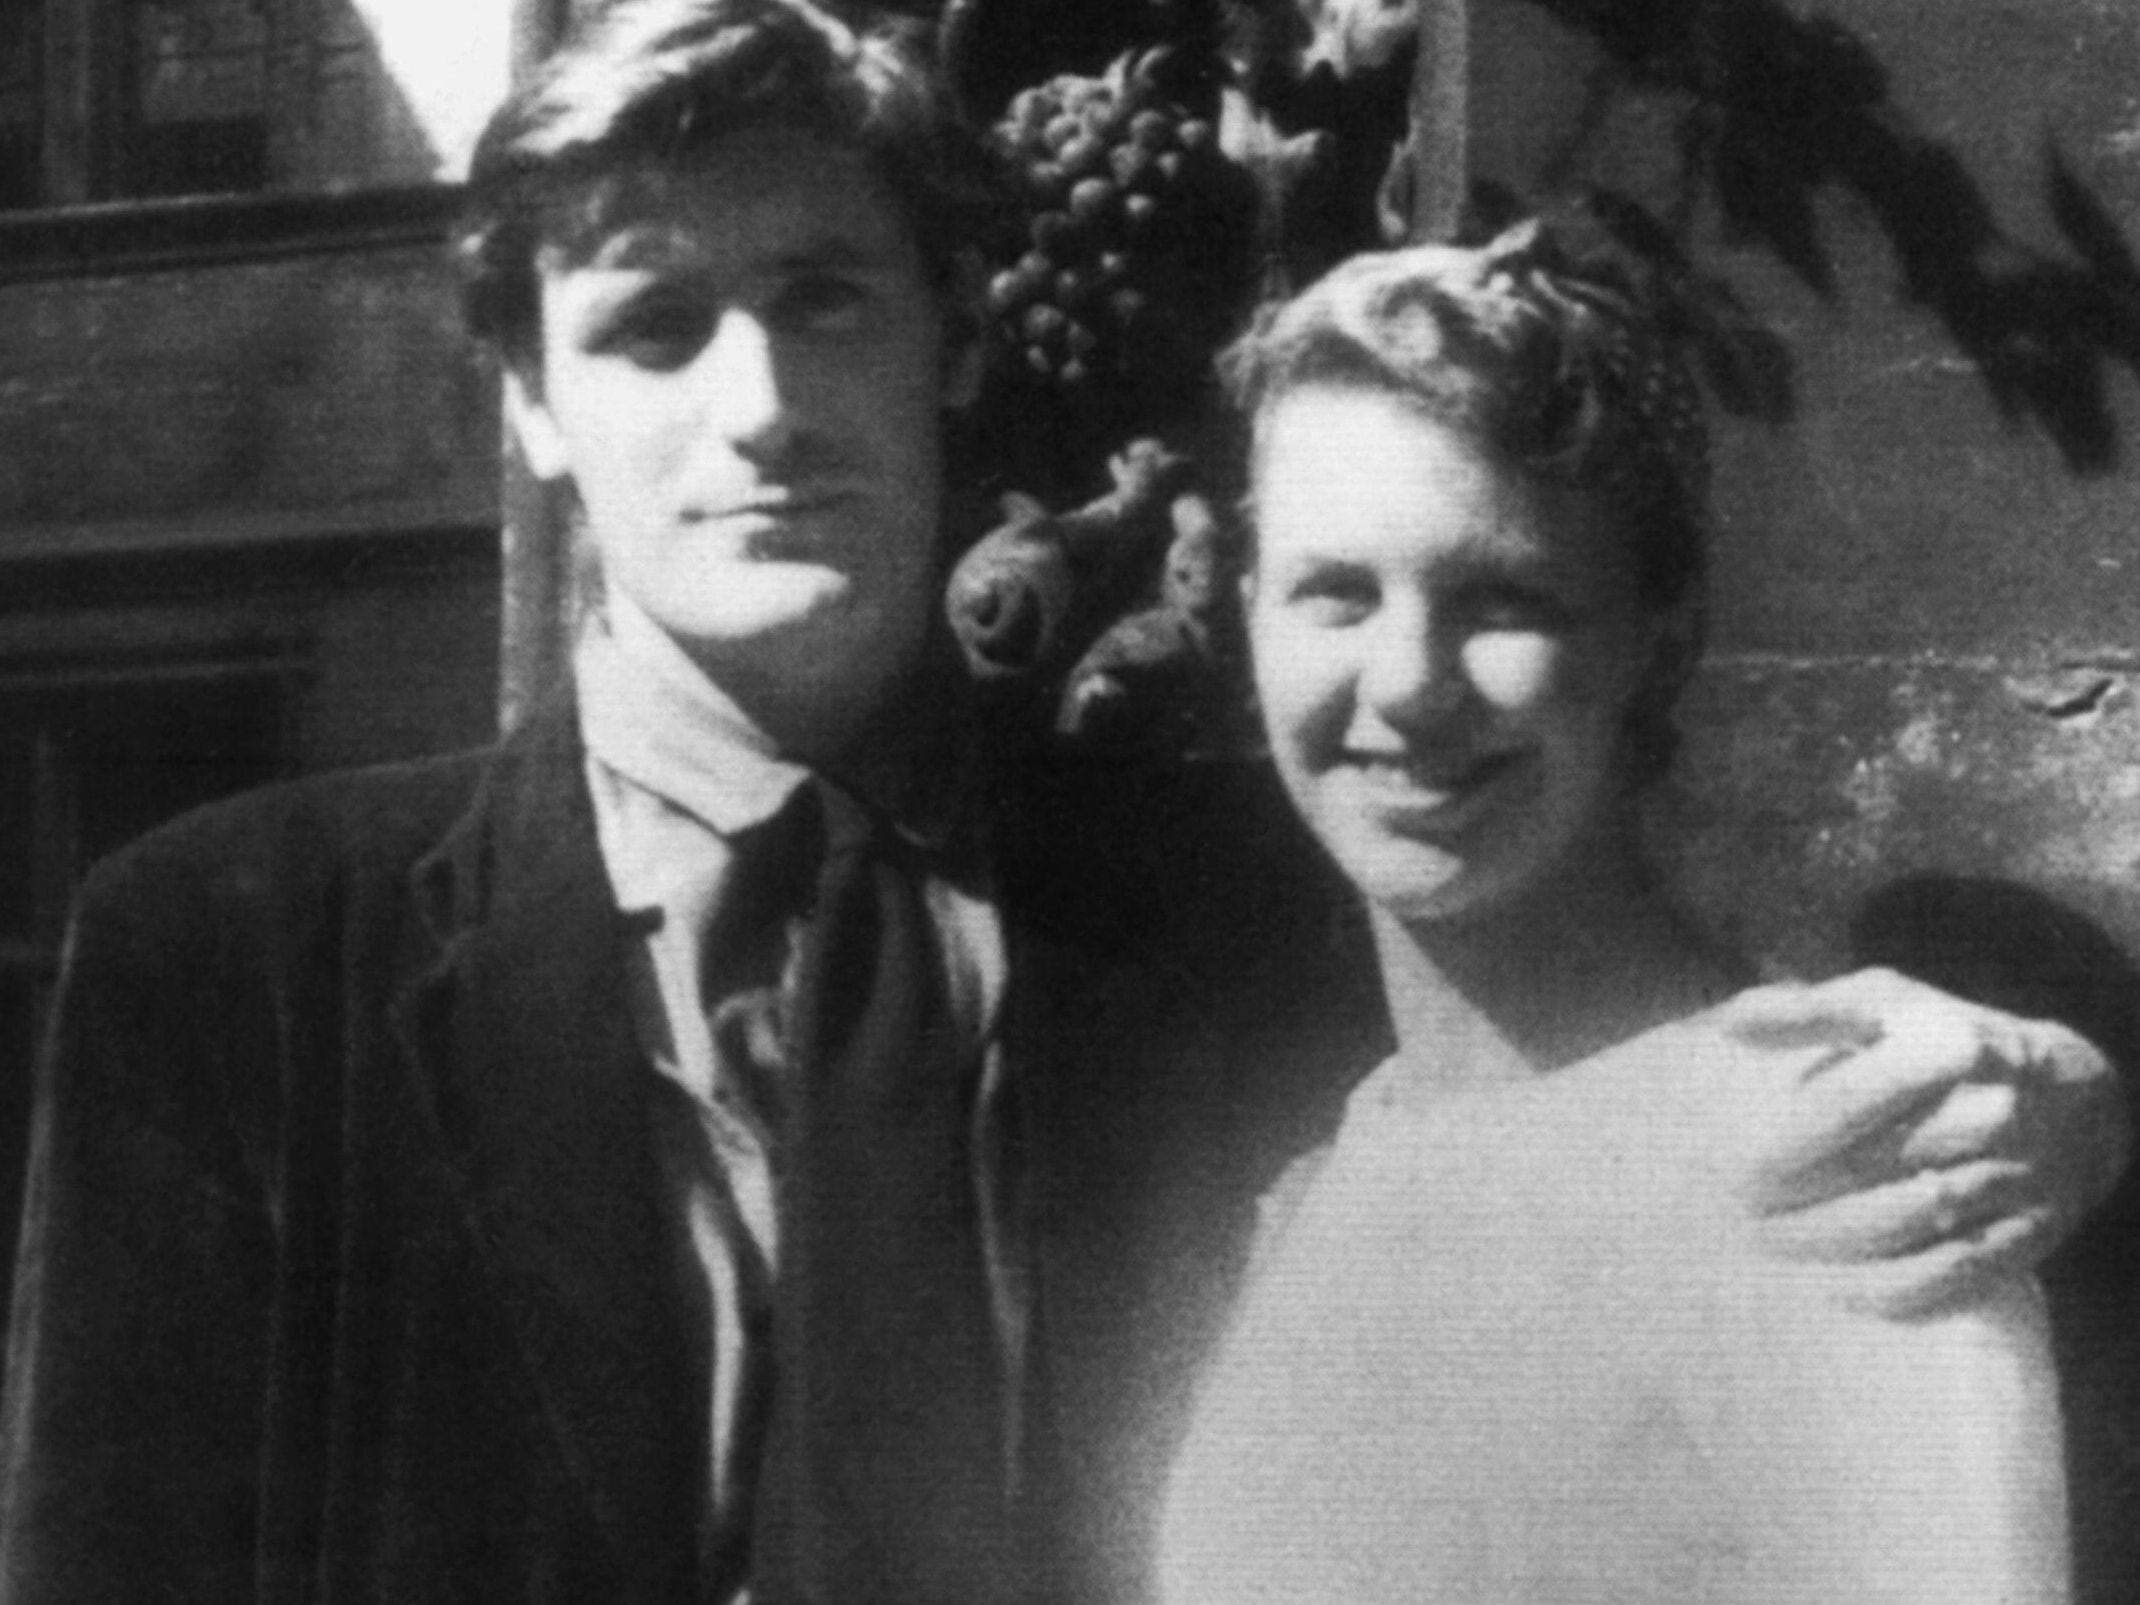 Sylvia Plath's love letters to Ted Hughes up for auction at Sotheby's